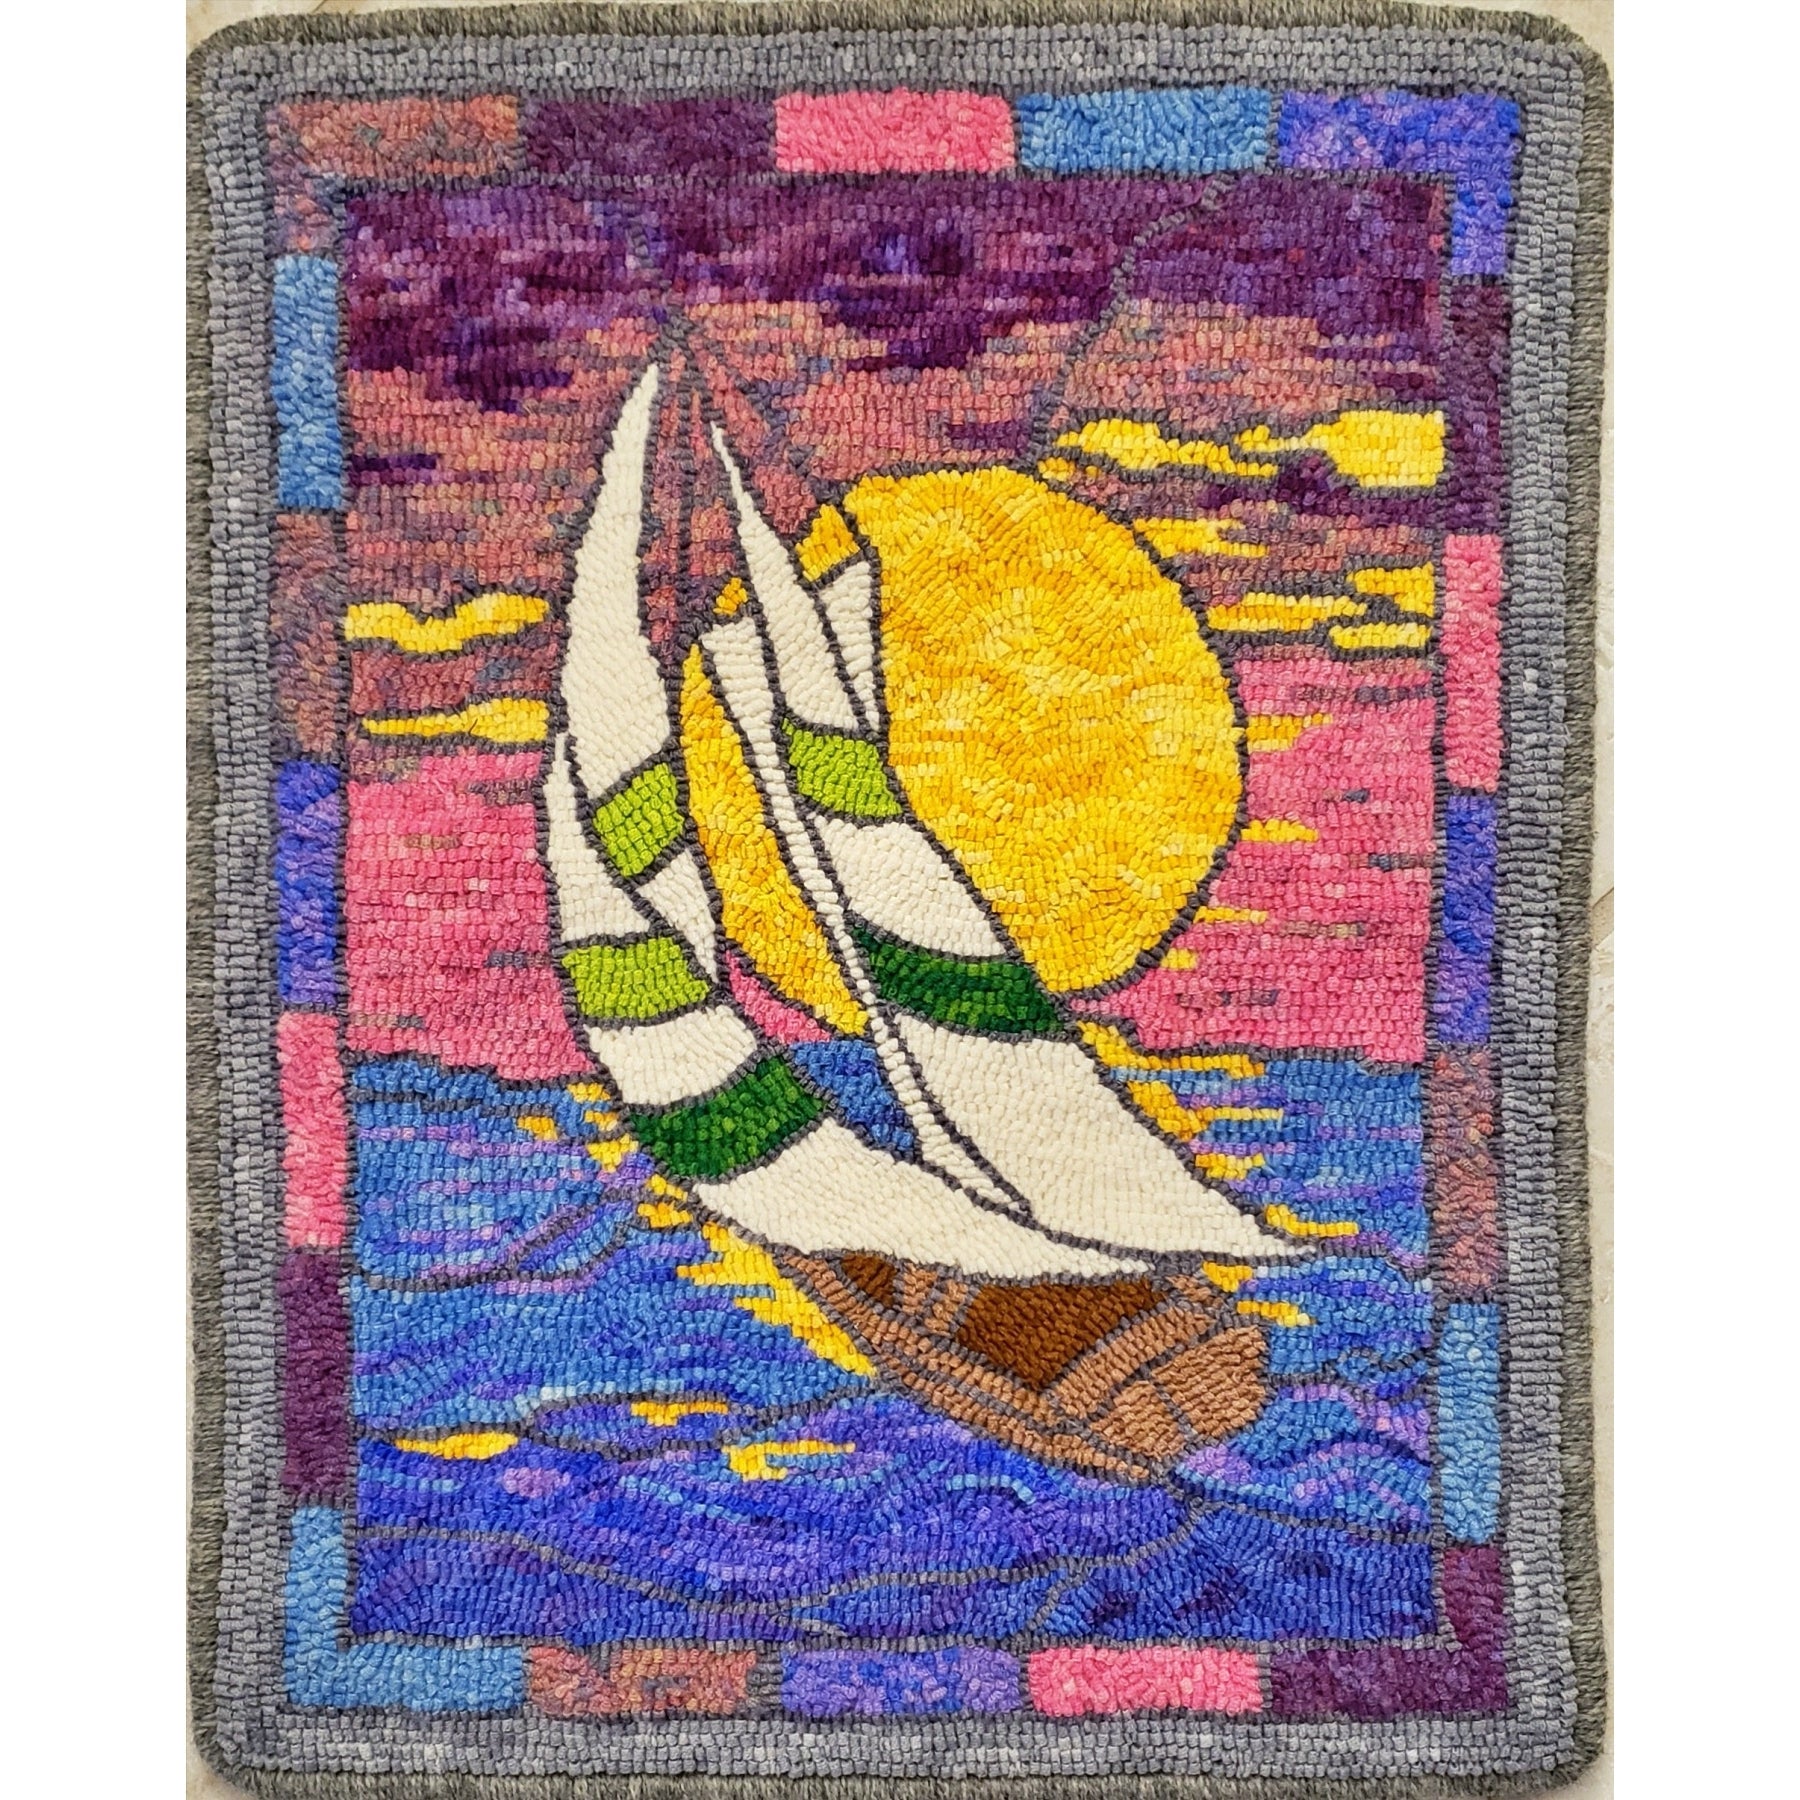 Stained Glass Boat, rug hooked by Donna Martin